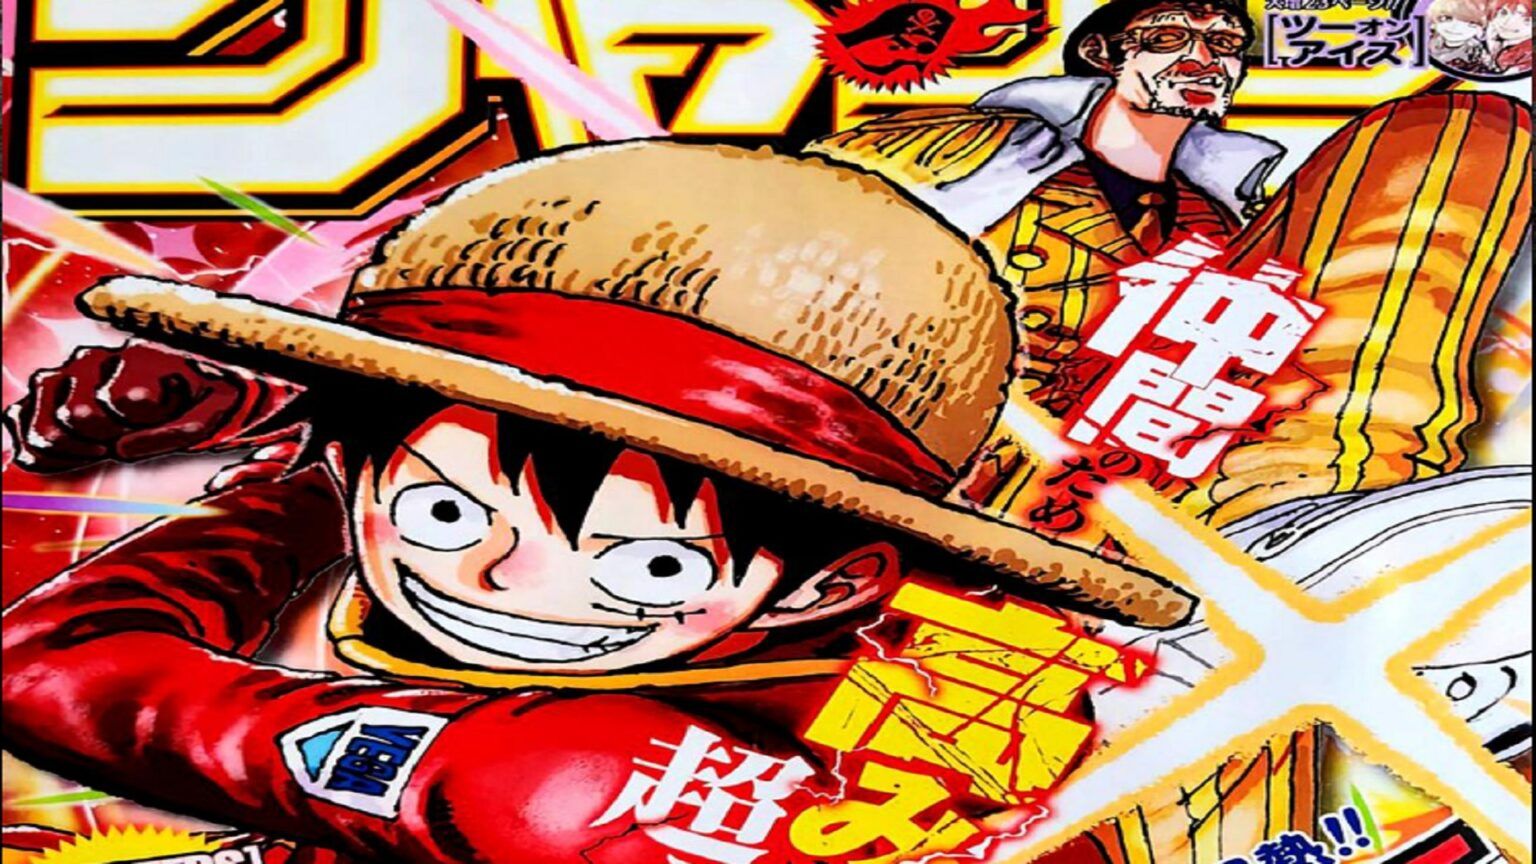 One Piece 1094 features on the cover both Luffy and Kizaru